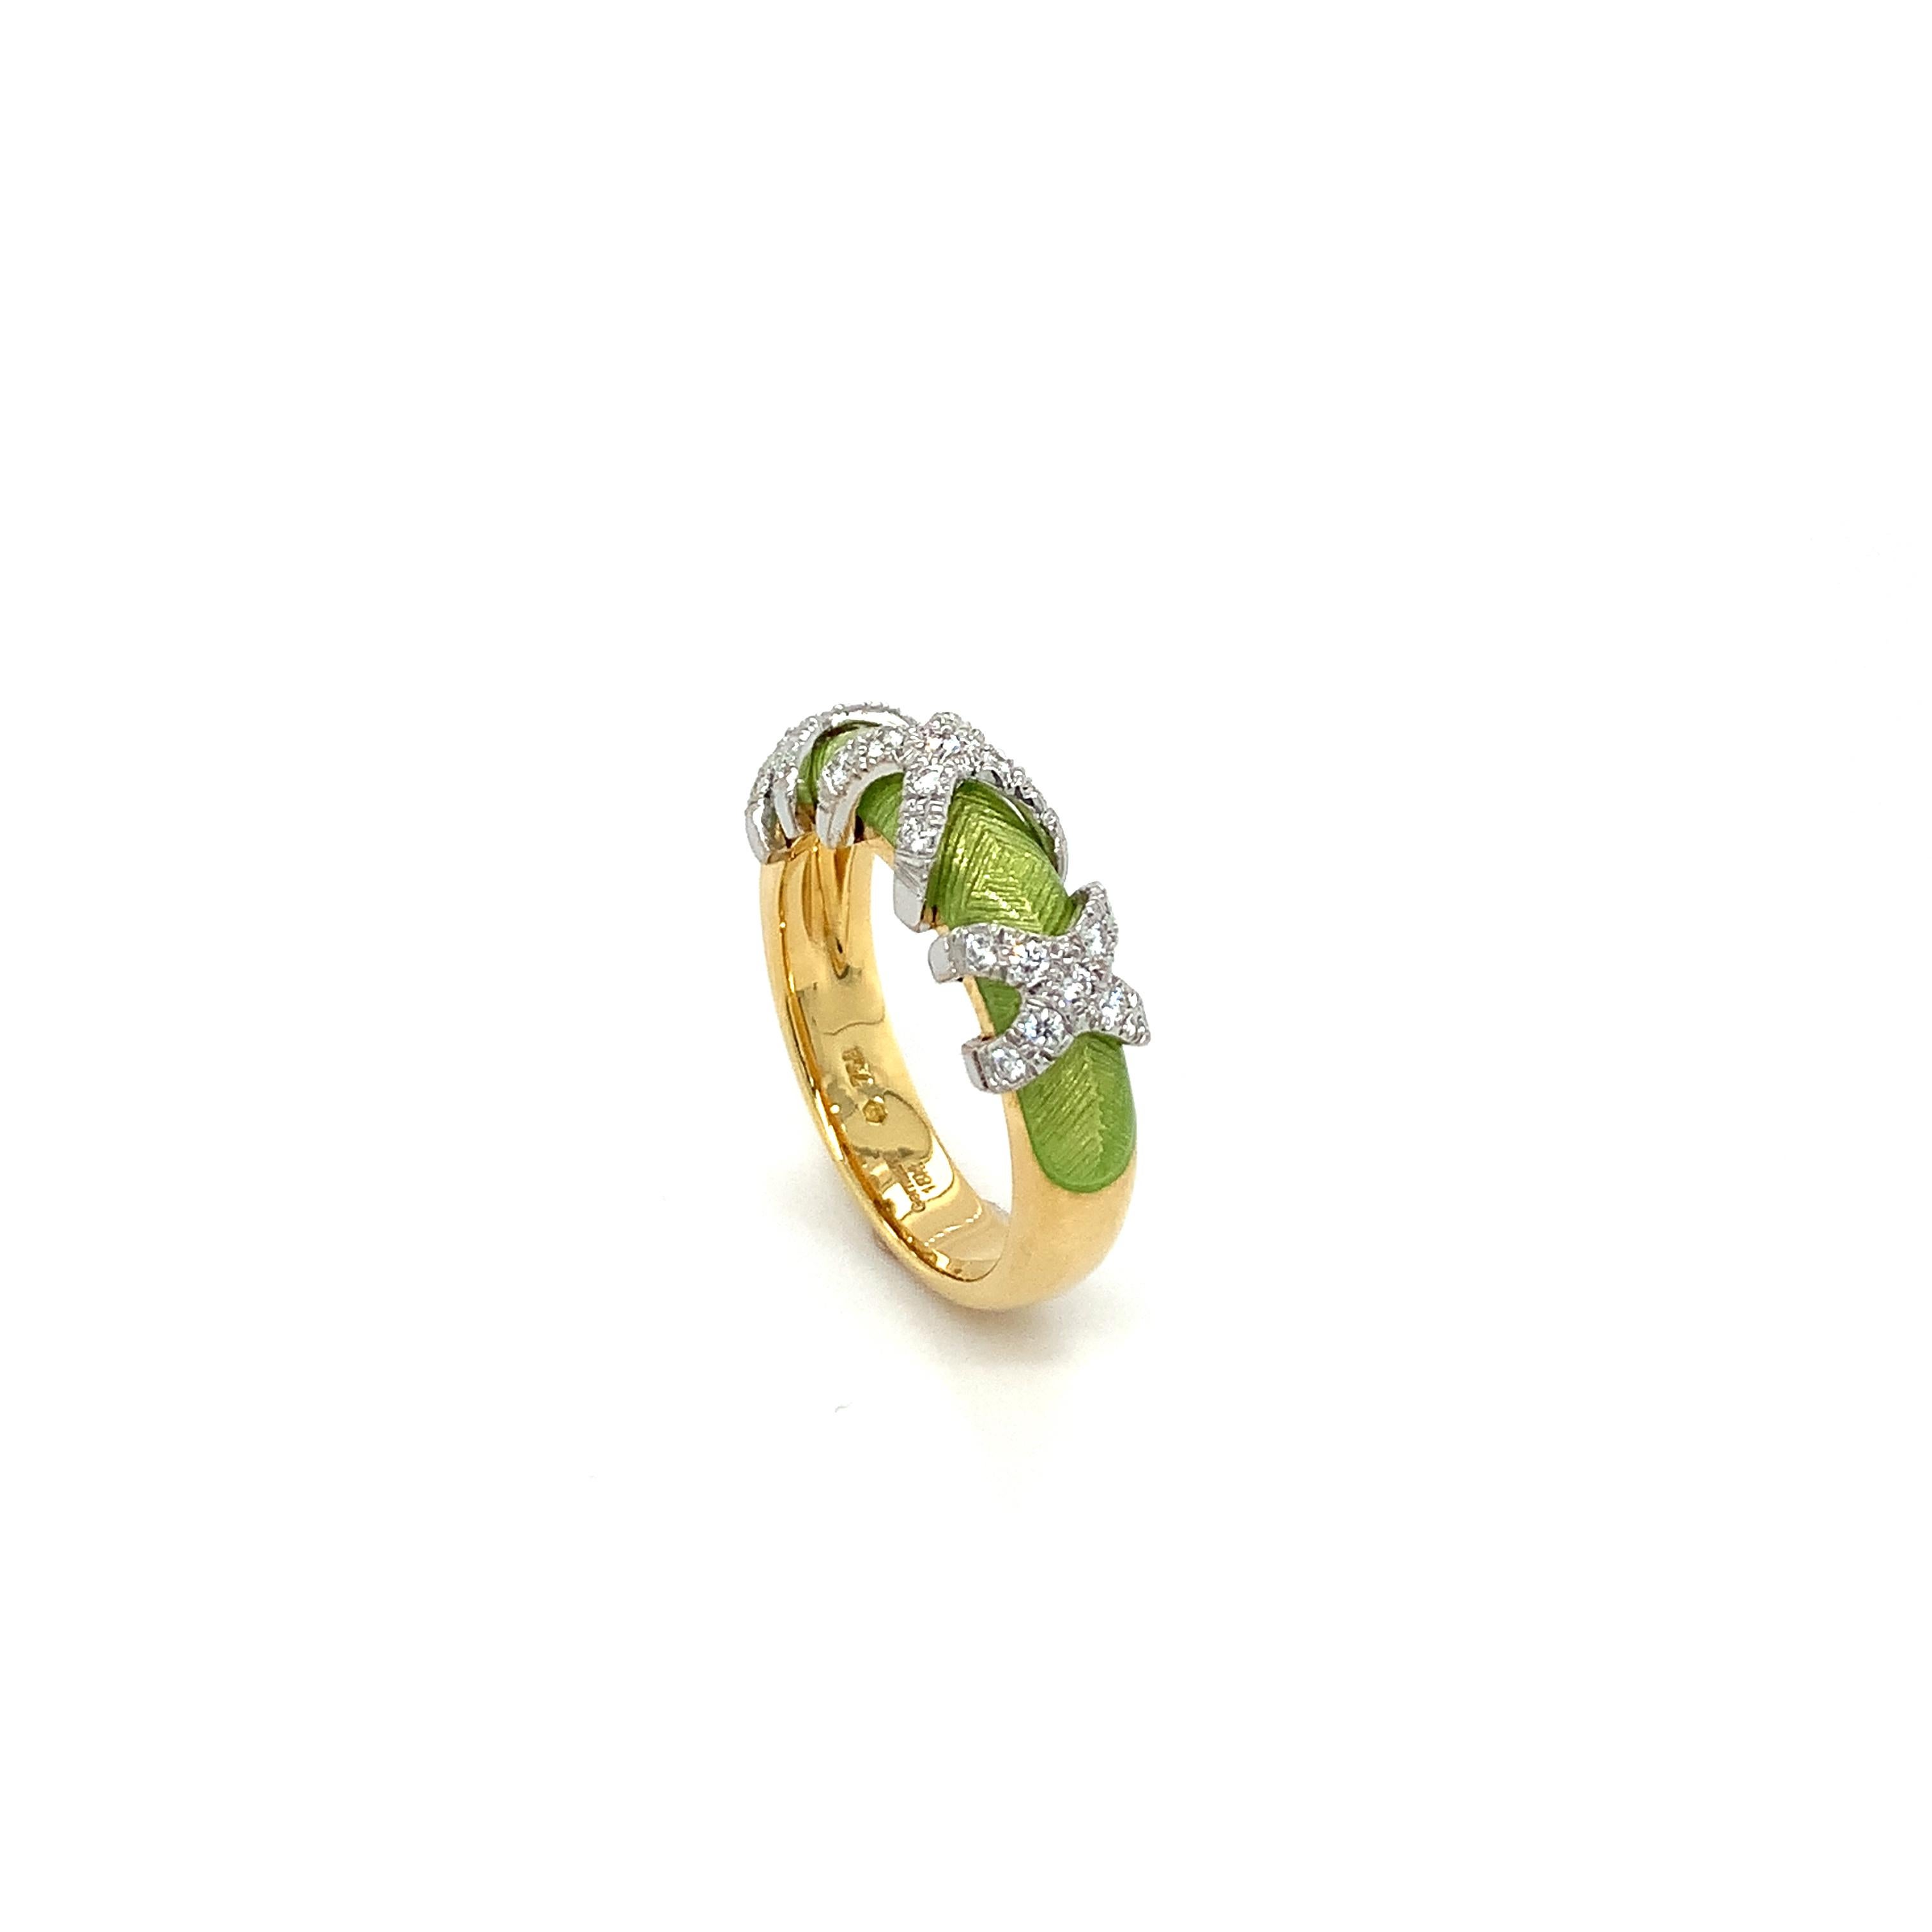 Fabergé Xenia ring, translucent spring green enamel, 18k yellow and white gold, 27 diamonds 0,27 ct G/IF

Reference: F2503/P1/00/00/104
Brand: Fabergé
Collection: Xenia
Workmaster: Victor Mayer, Germany
Material: 18k yellow gold / white